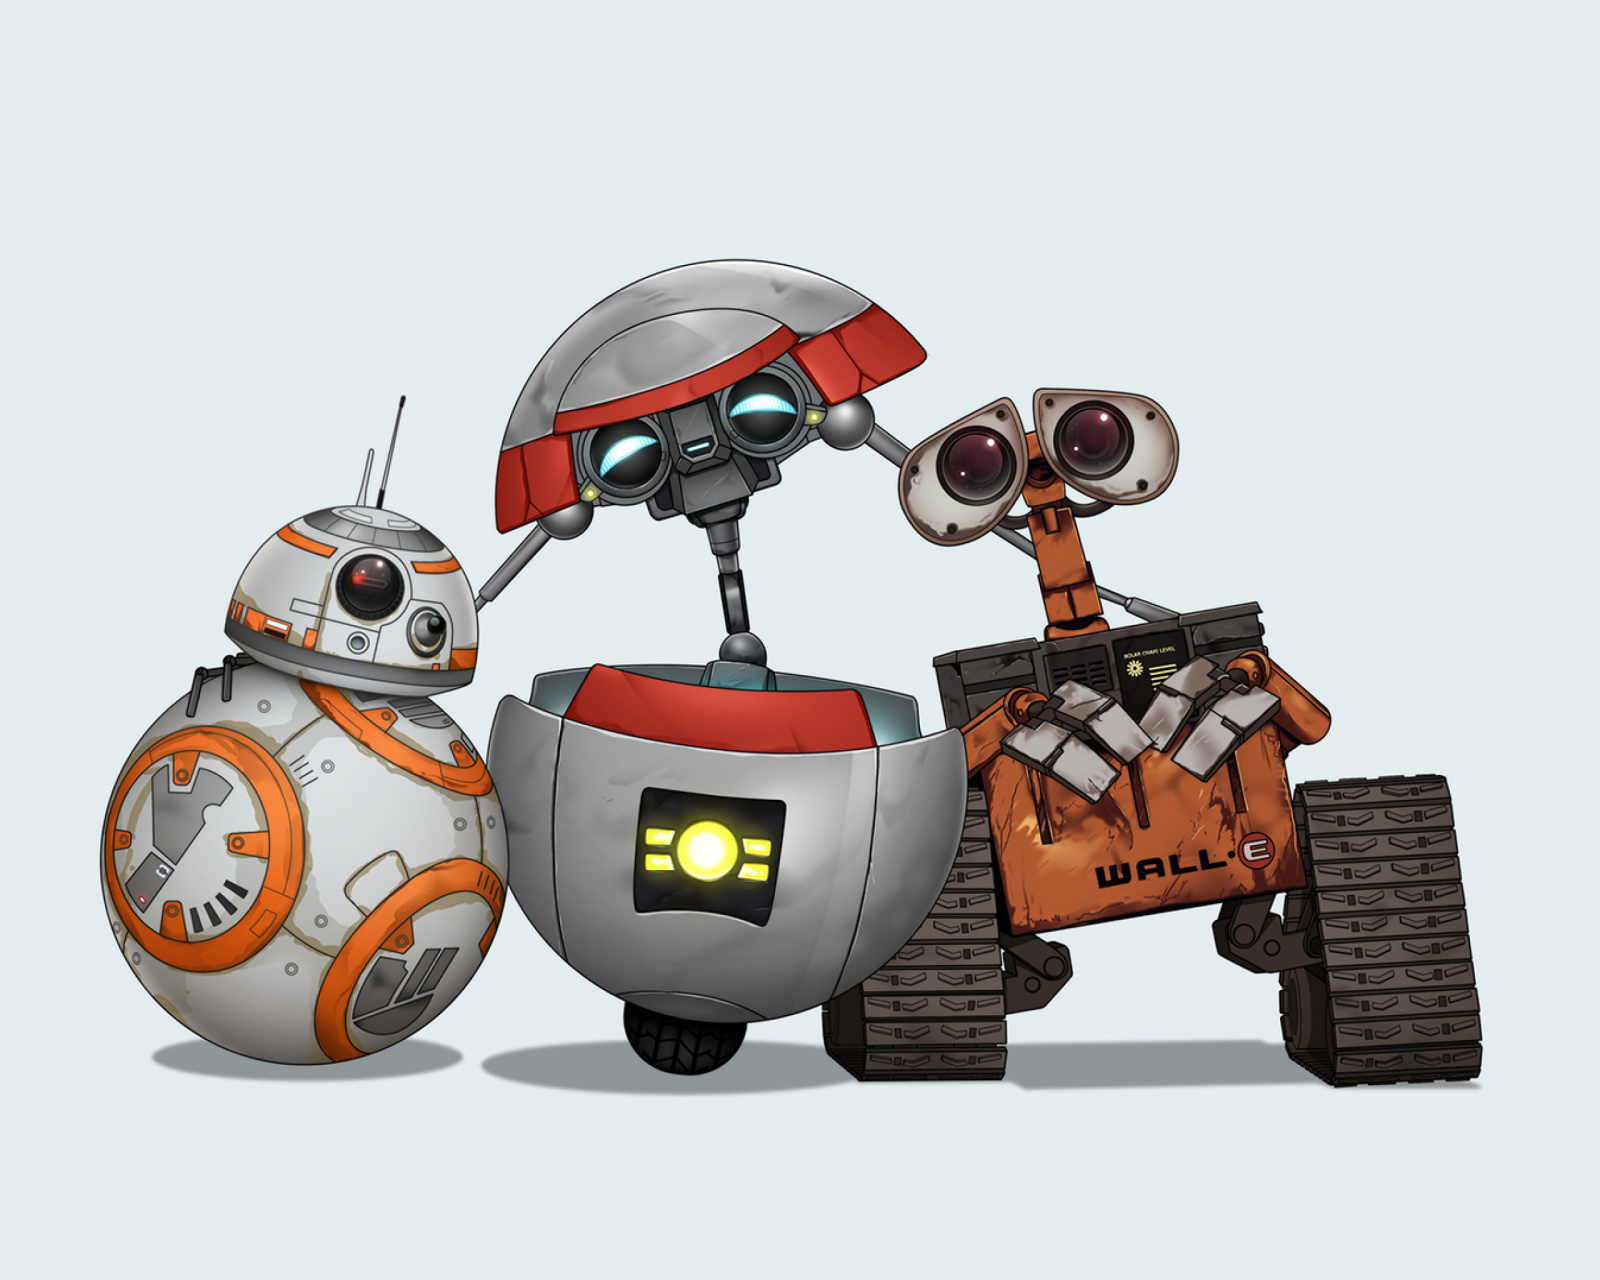 Star Wars and Walle wallpaper 1600x1280